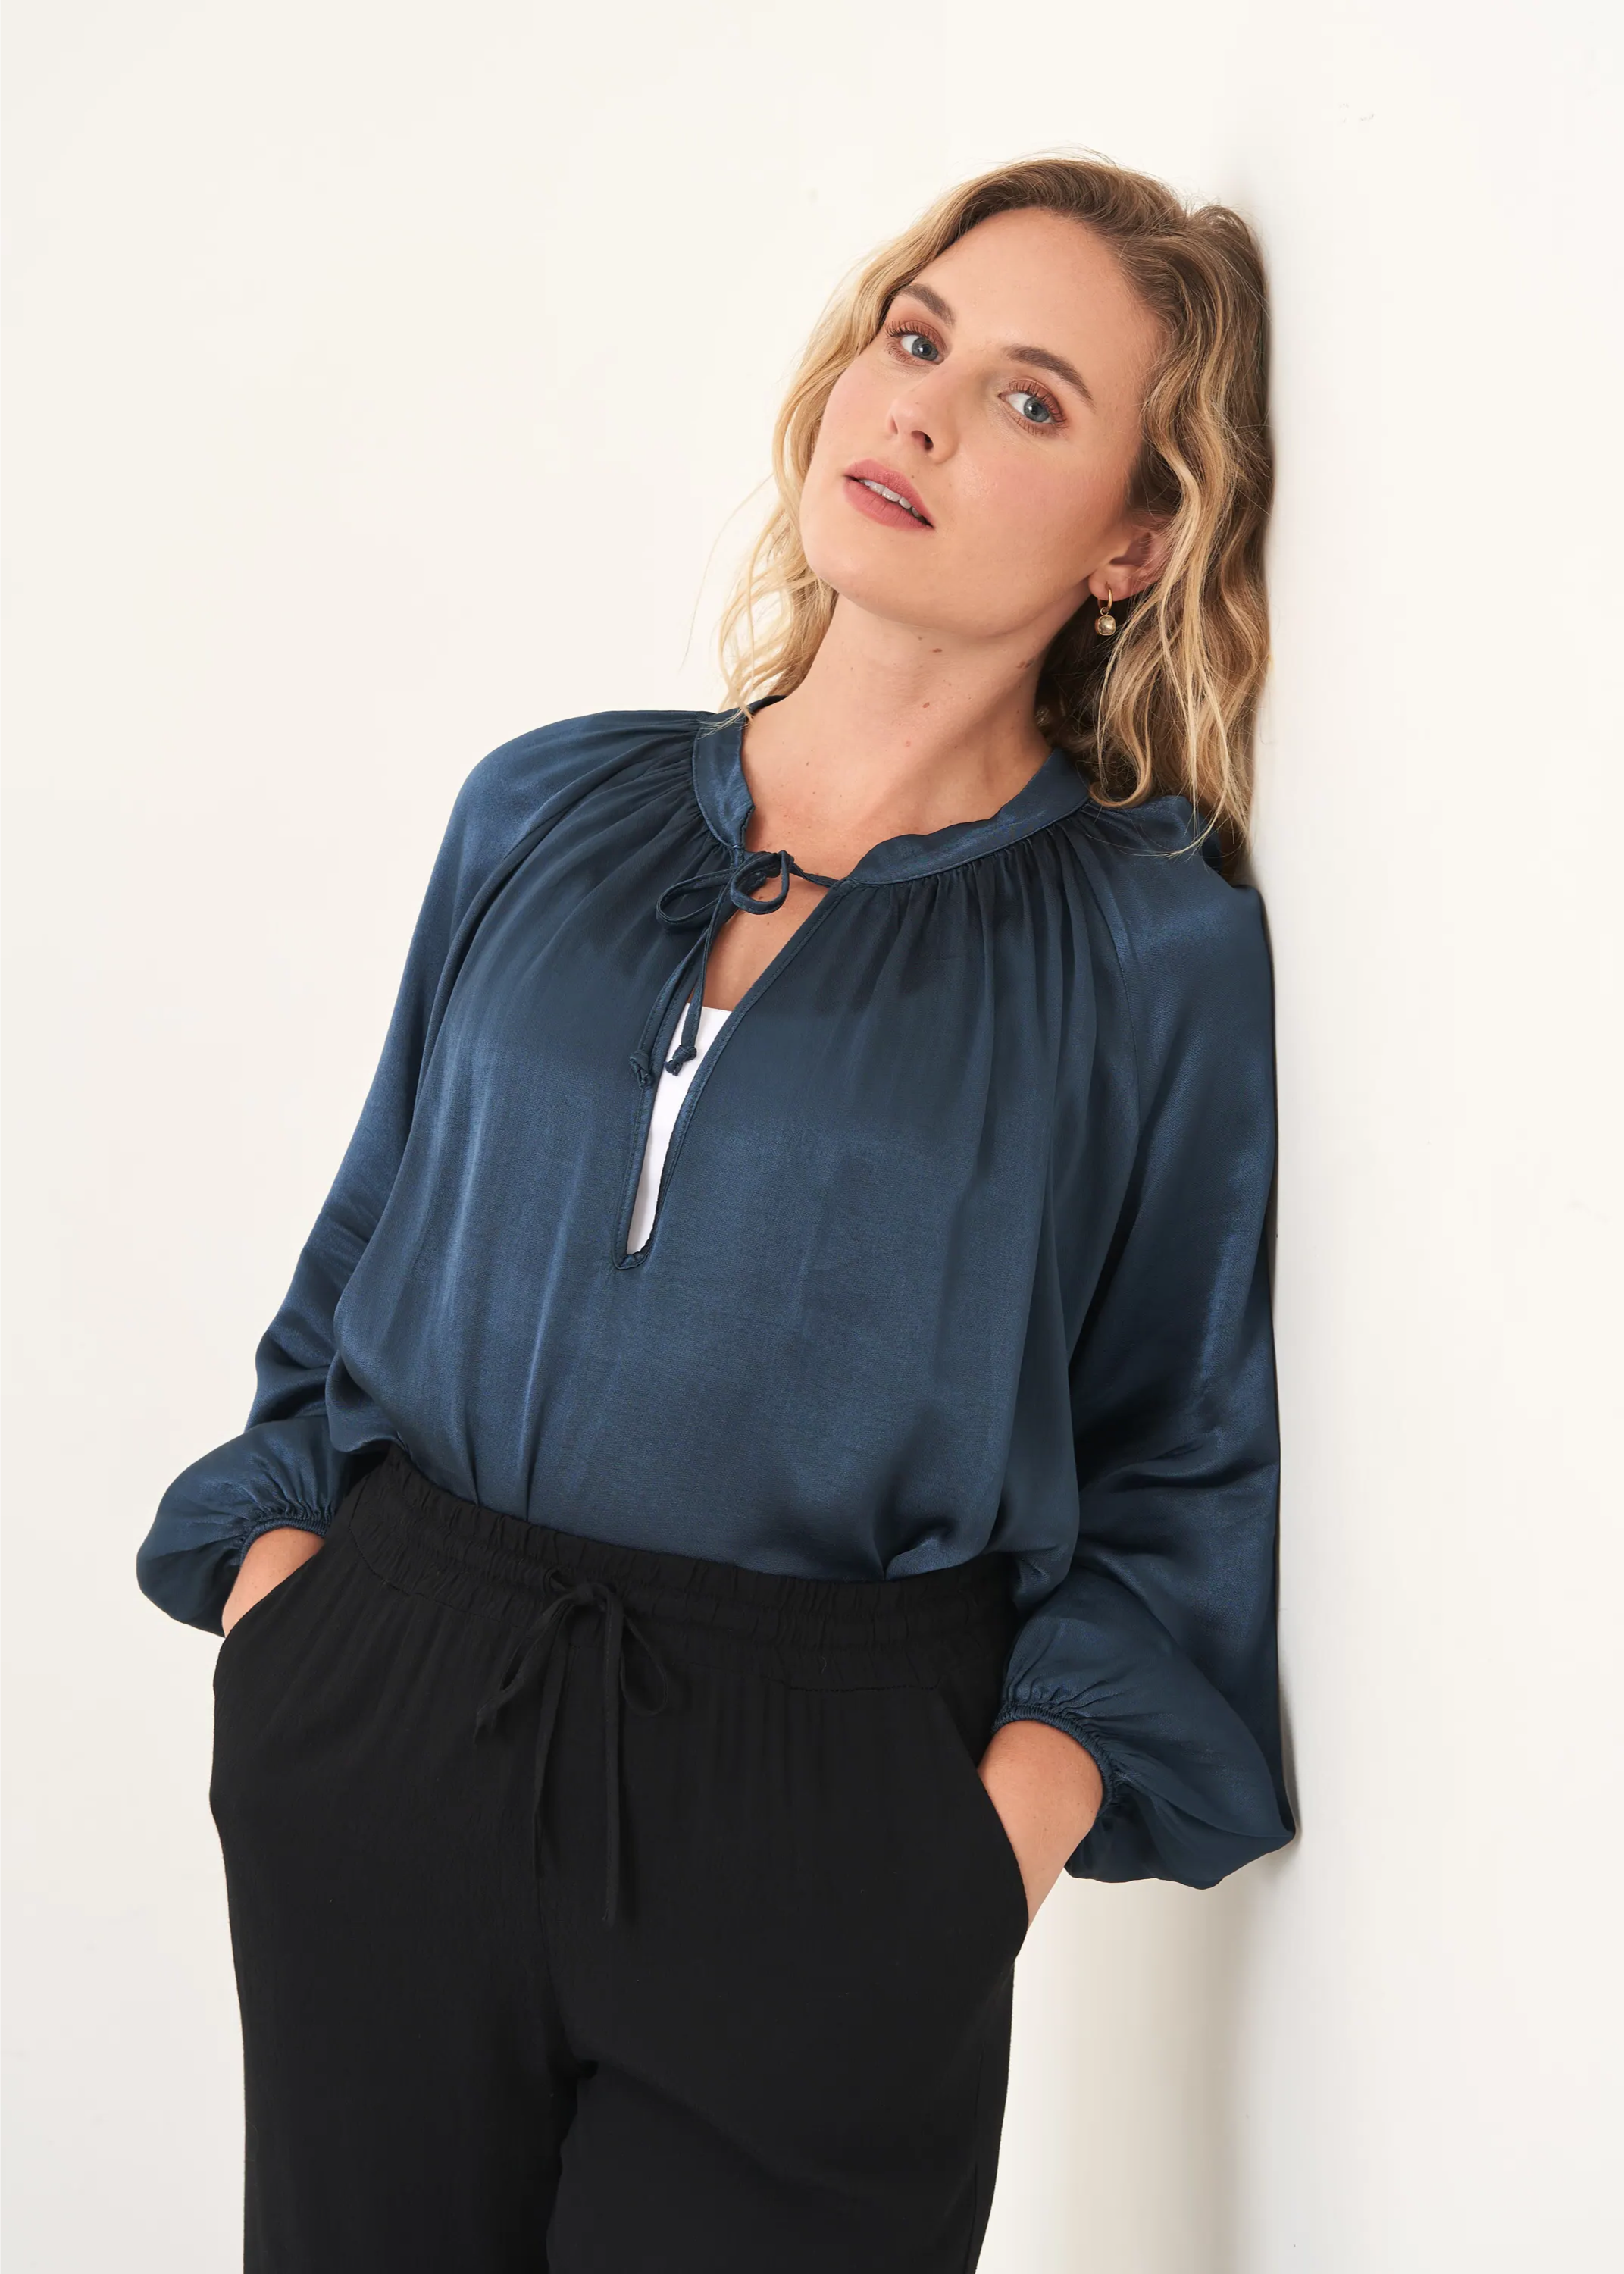 A model wearing a dark teal, satin oversized long sleeved blouse